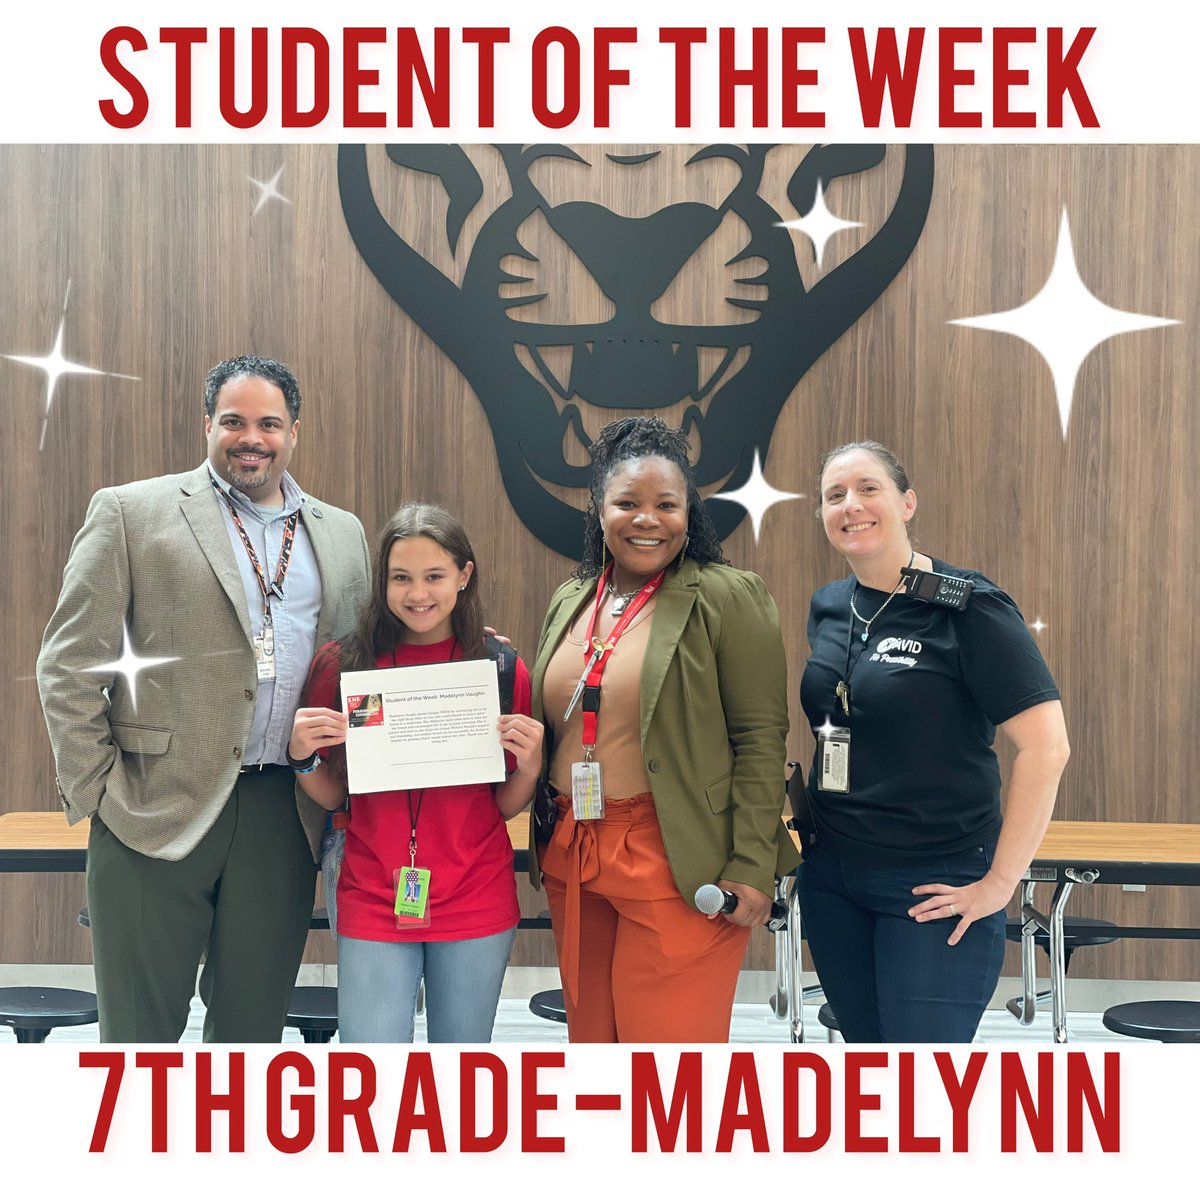 #StudentoftheWeek #7thgrade
Madelynn is a motivator! She goes put of her way to help others and is a kind and welcoming person. Thank you for being you! #KMSCougarPRIDE #KMS1ofaKIND @HumbleISD_KMS @HumbleISD_PSS @MsDawson2005 @PrincipalCurl @counselors_kms @HumbleISD_CBS